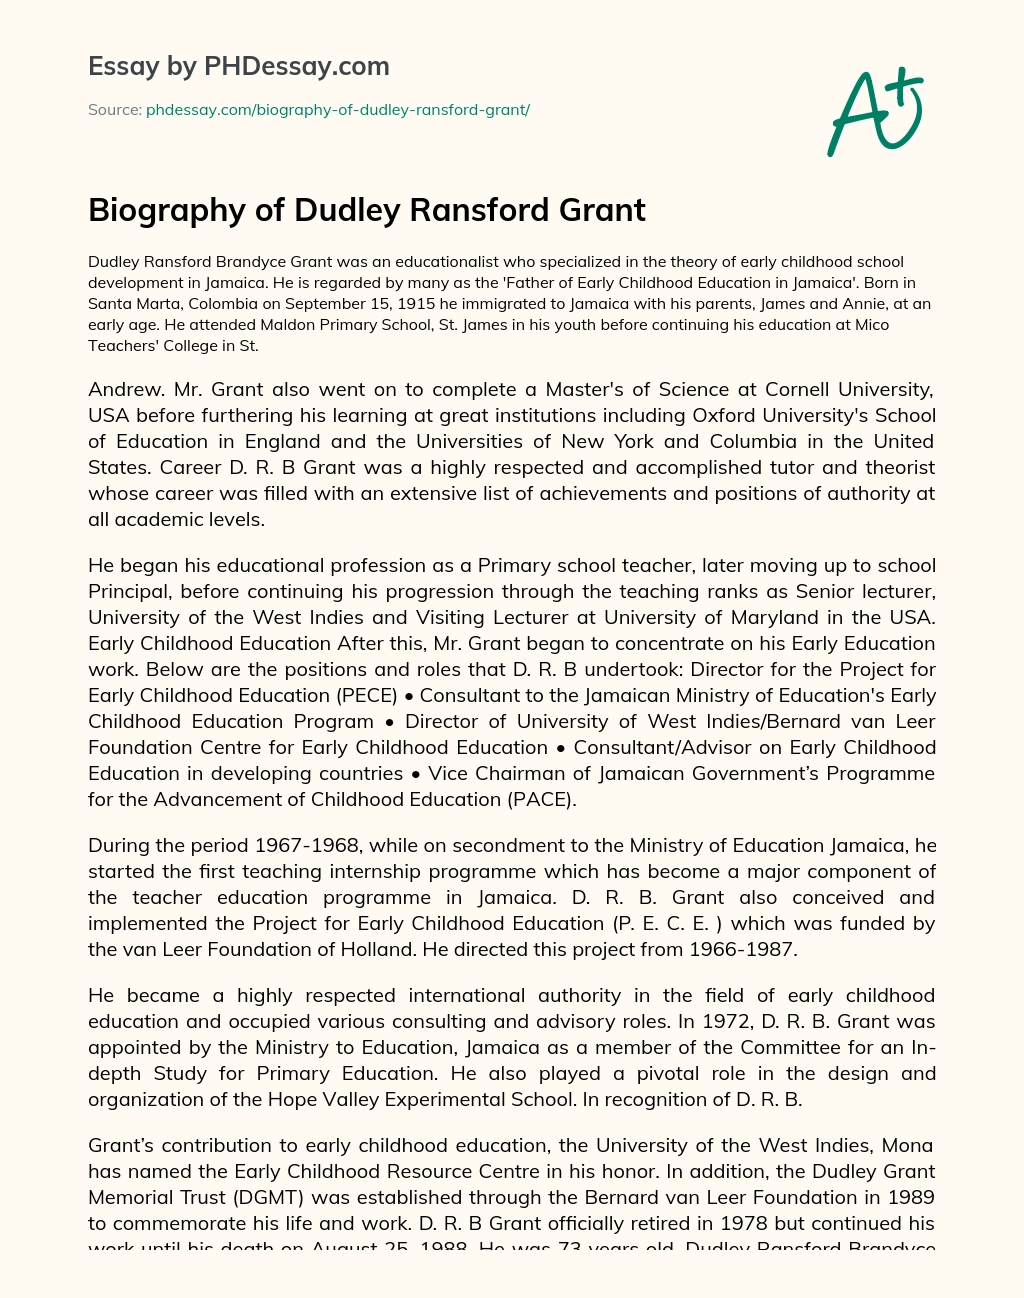 Biography of Dudley Ransford Grant essay